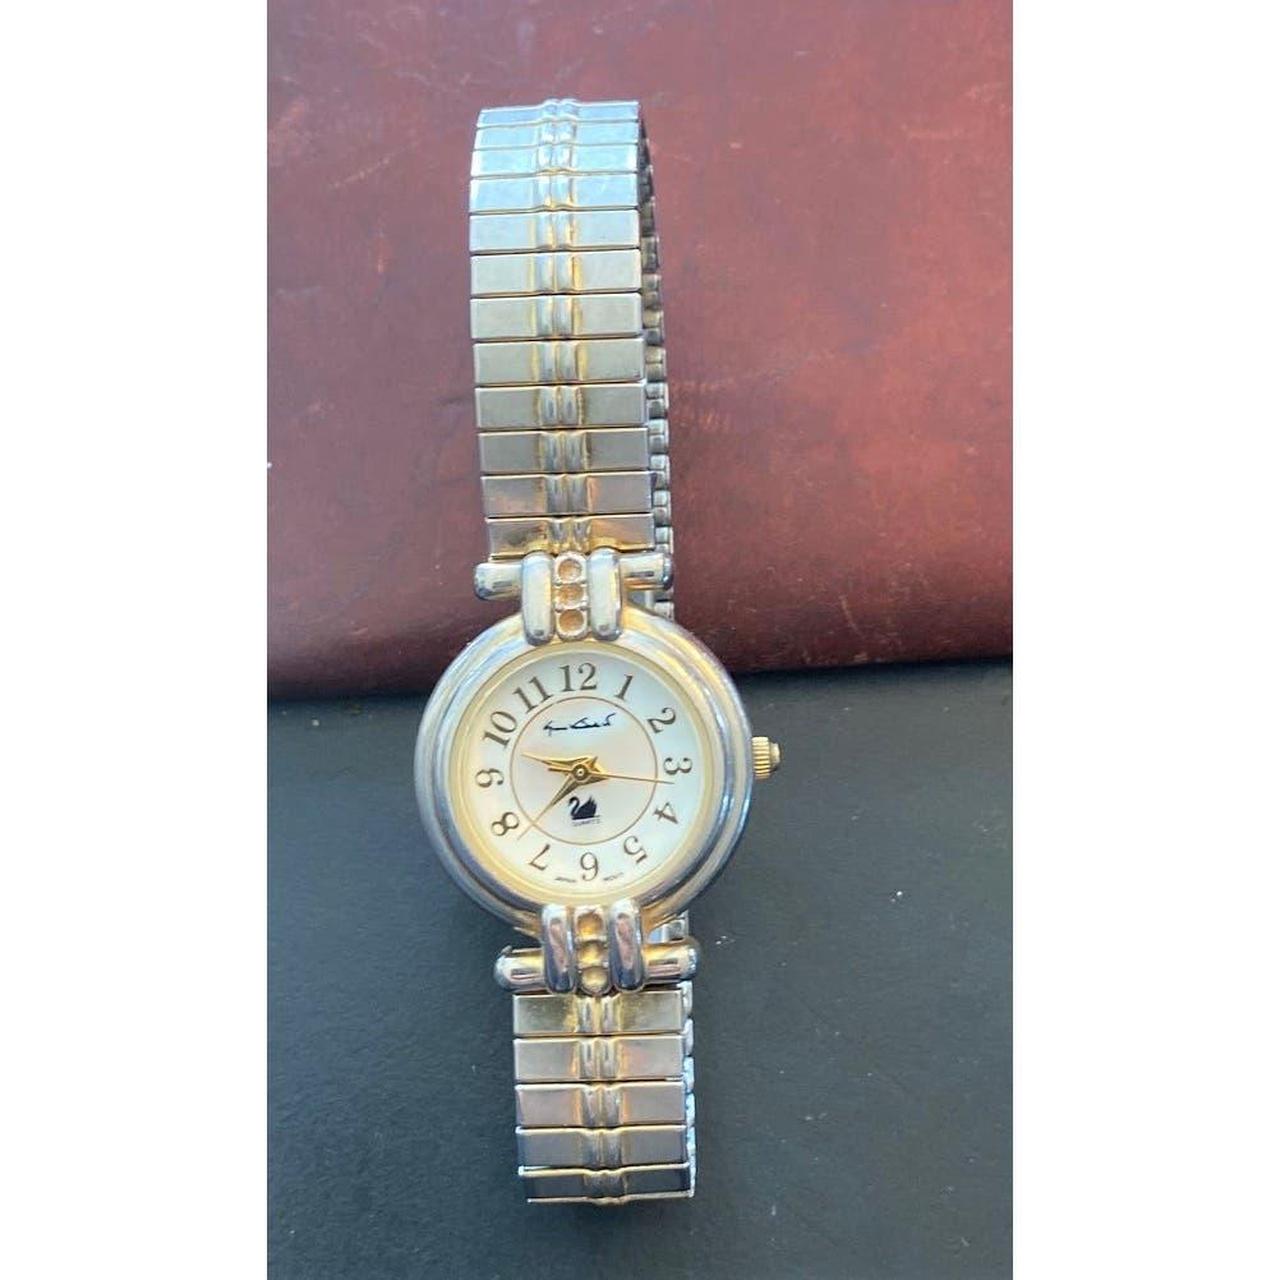 Sold at Auction: Raymond Weil watch Gloria